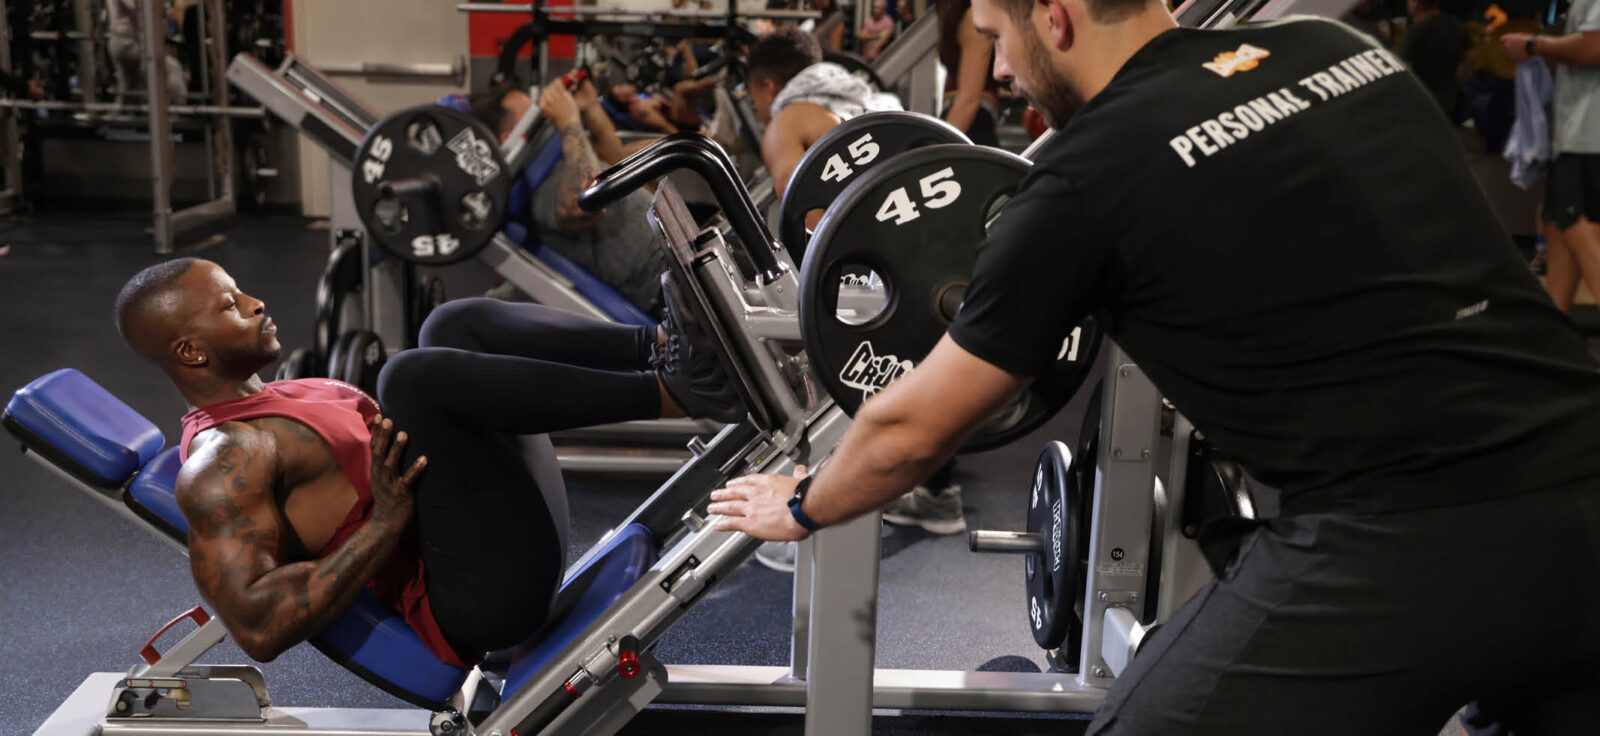 What Are the Best Gym Membership Deals and Discounts Our Insider Tips